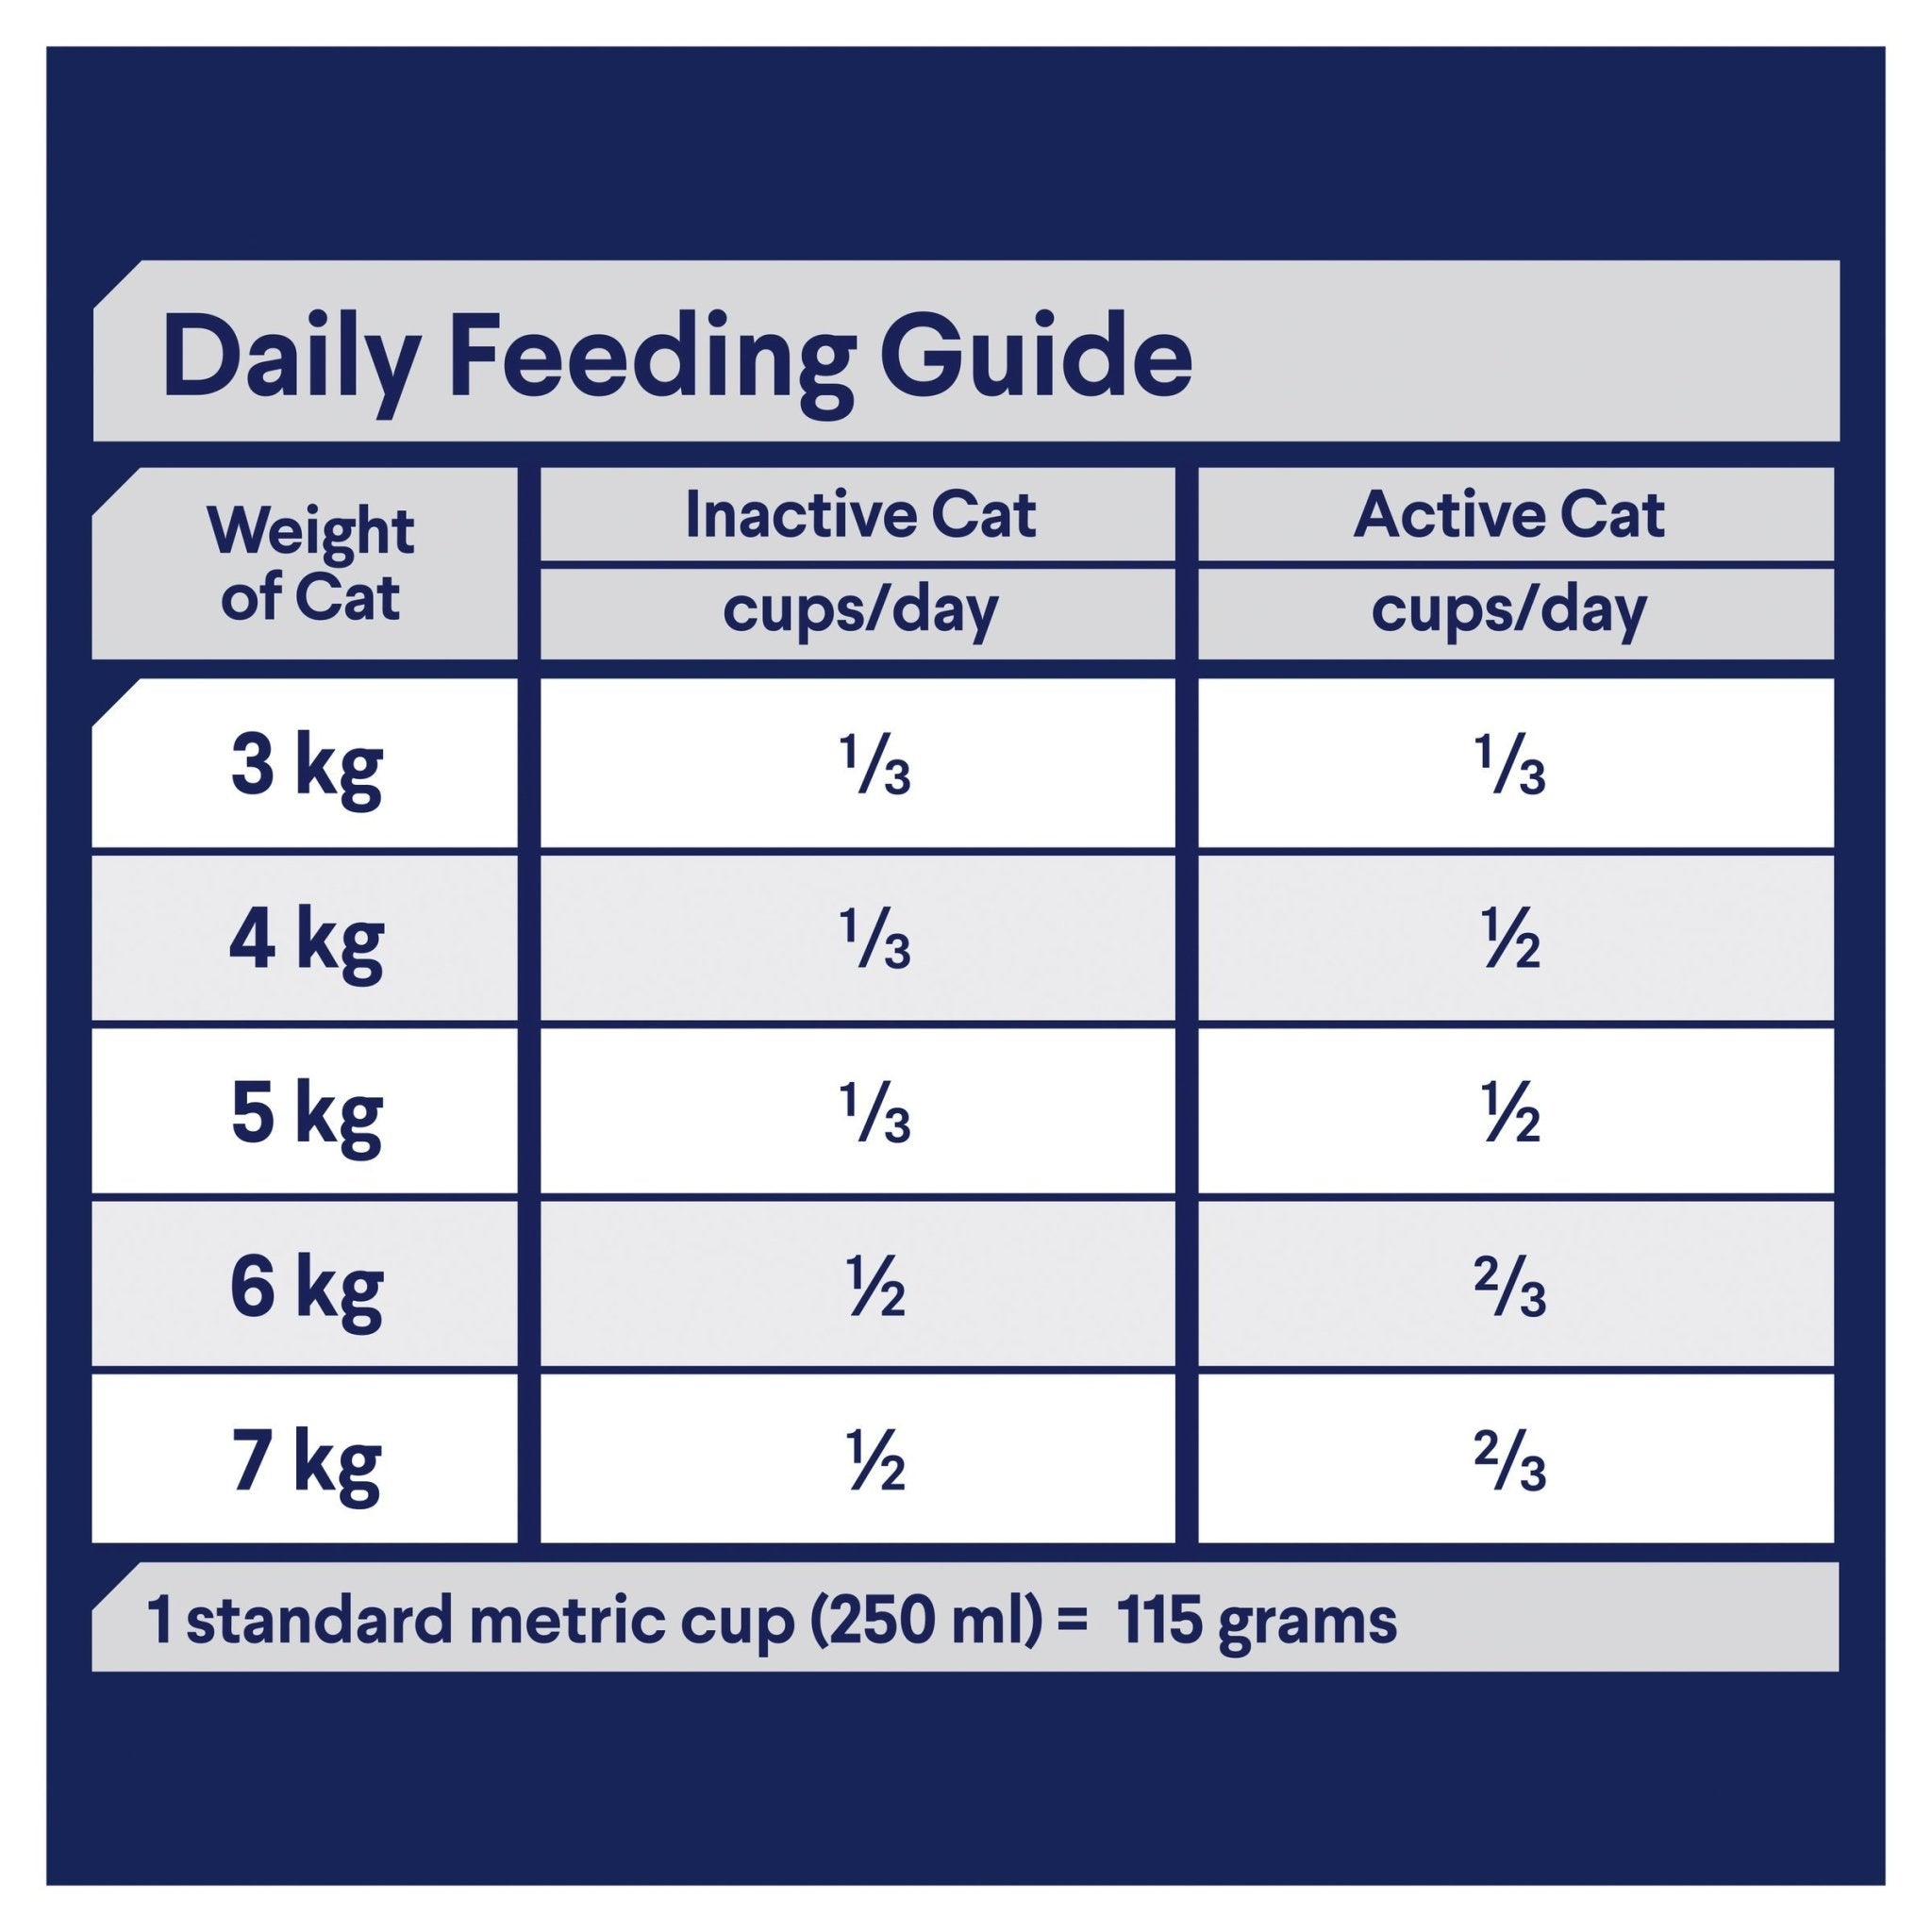 ADVANCE Healthy Weight Adult Dry Cat Food Chicken with Rice 2kg Bag